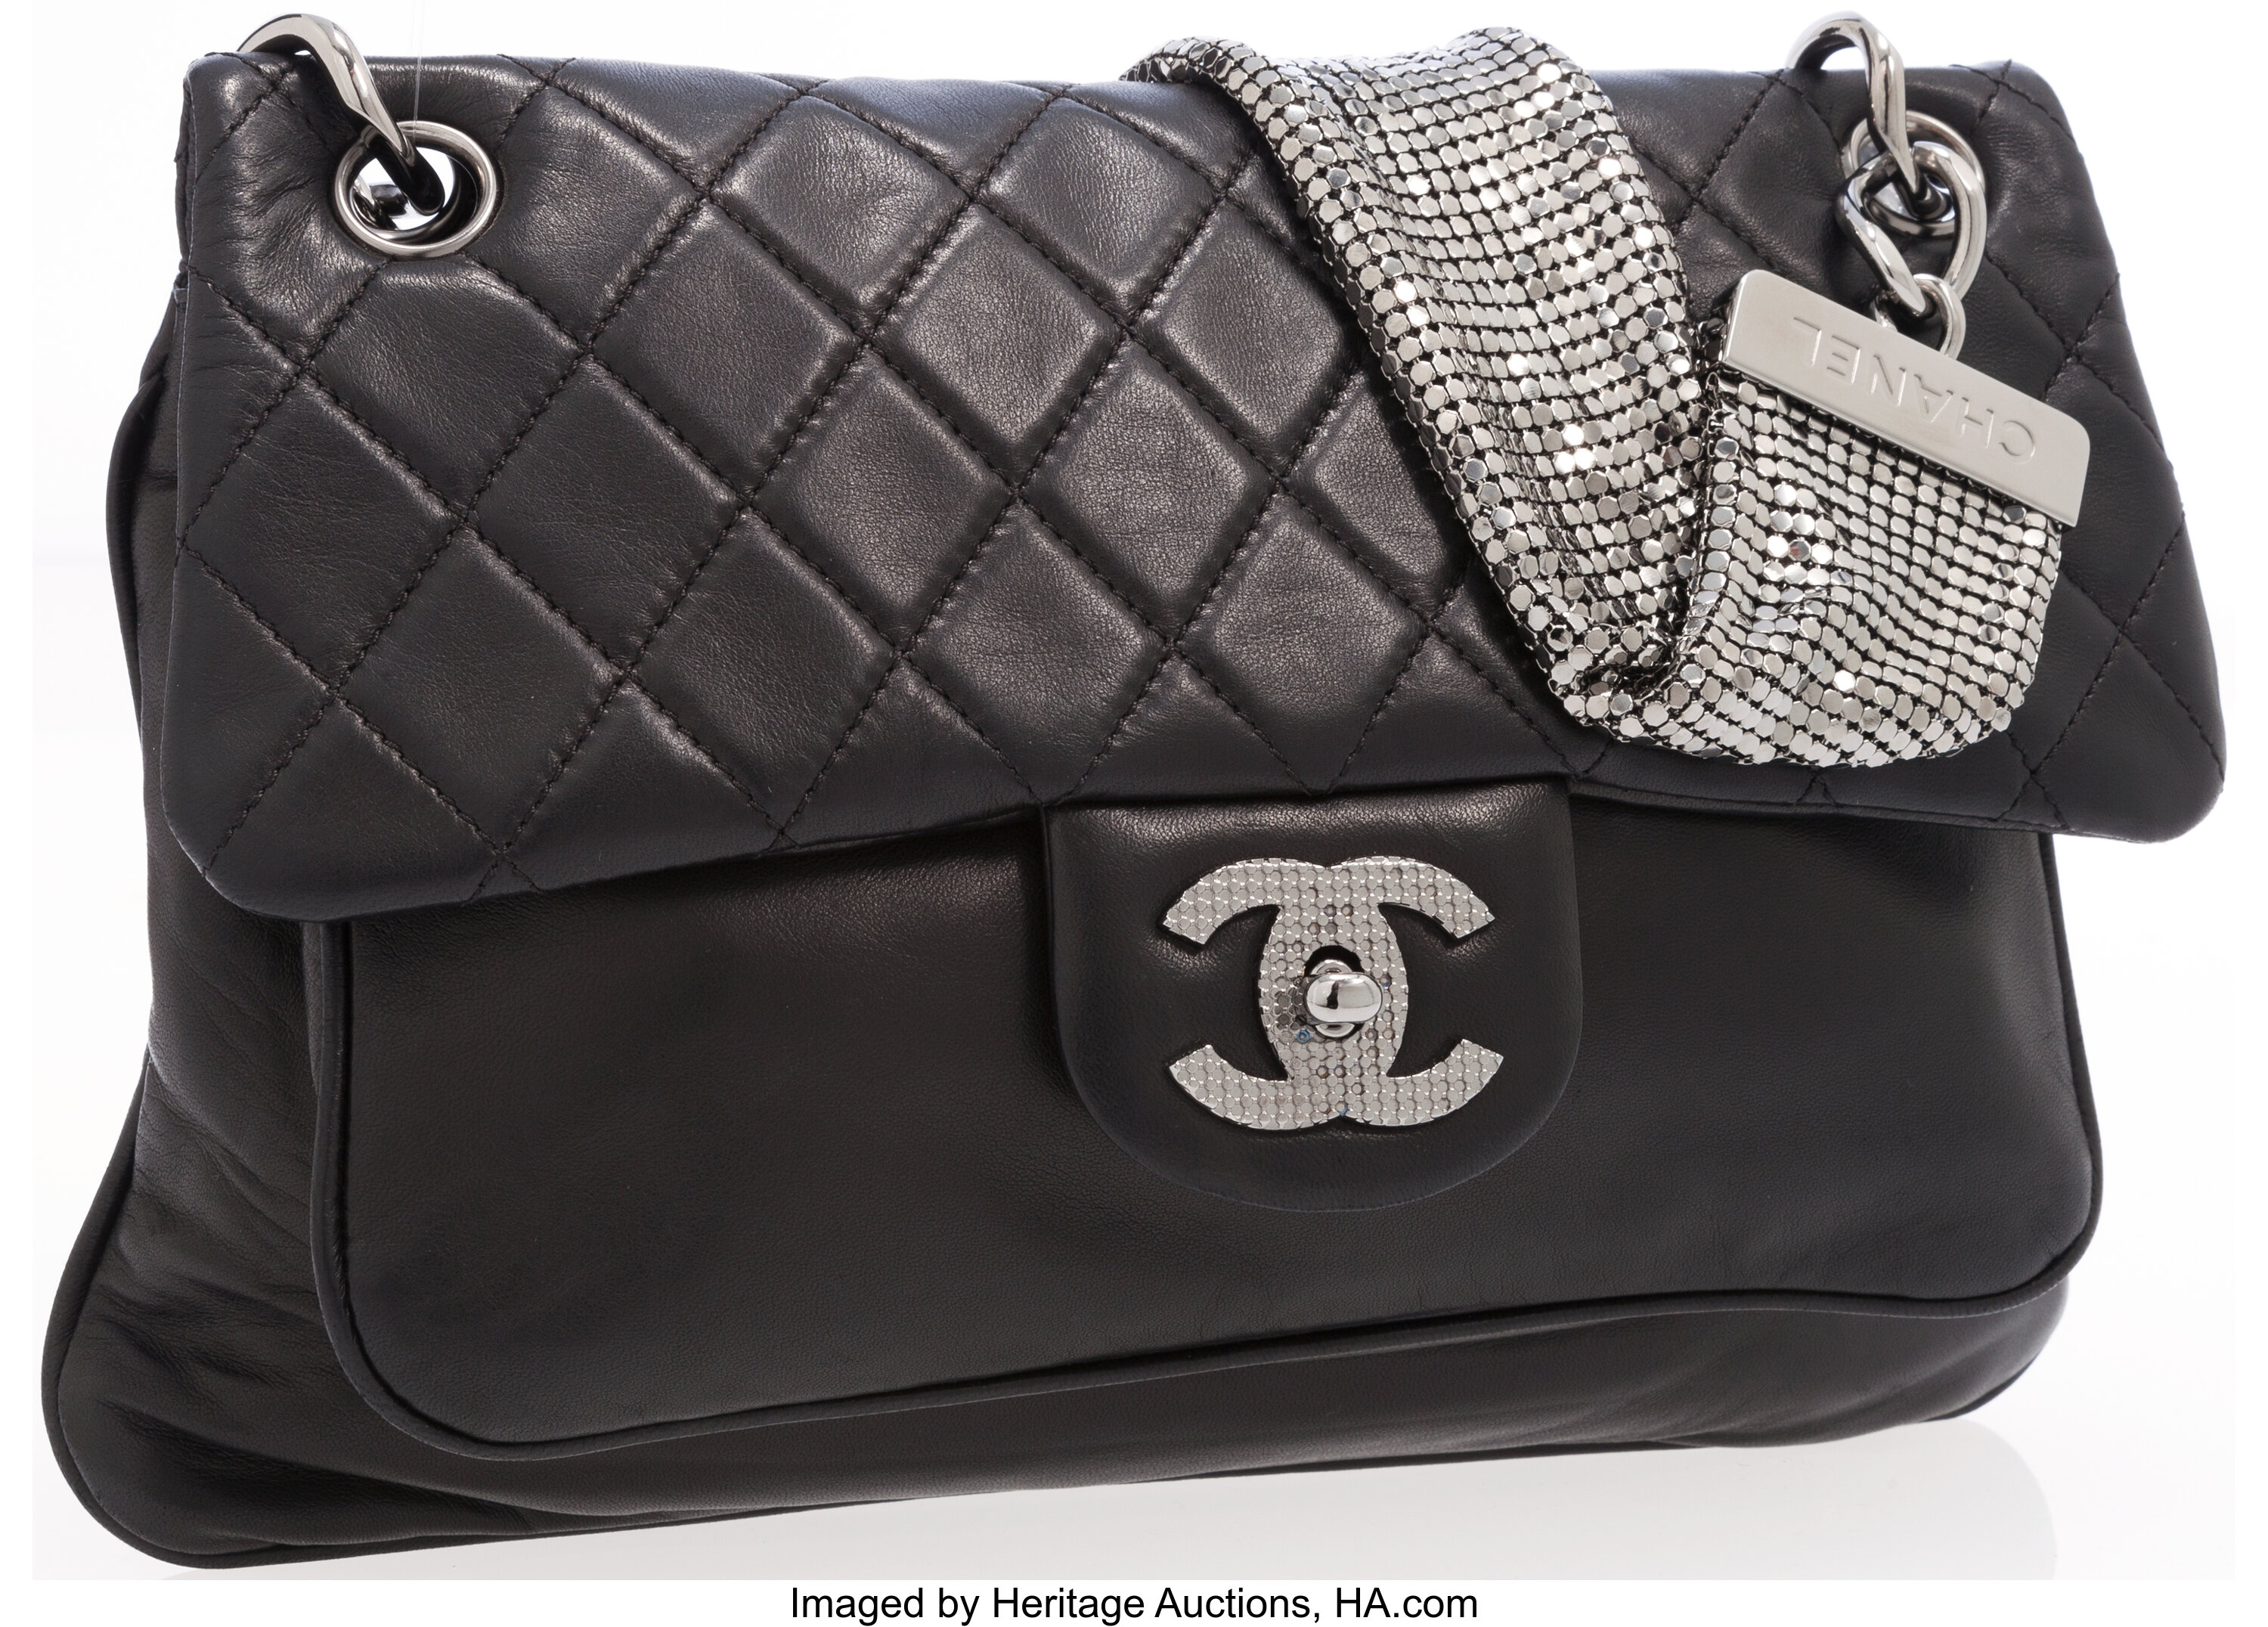 NEW YSL POUCH CASE BLACK LEATHER W SILVER GROMMETS  Black leather  espadrilles, Chanel chain, Everyday essentials products